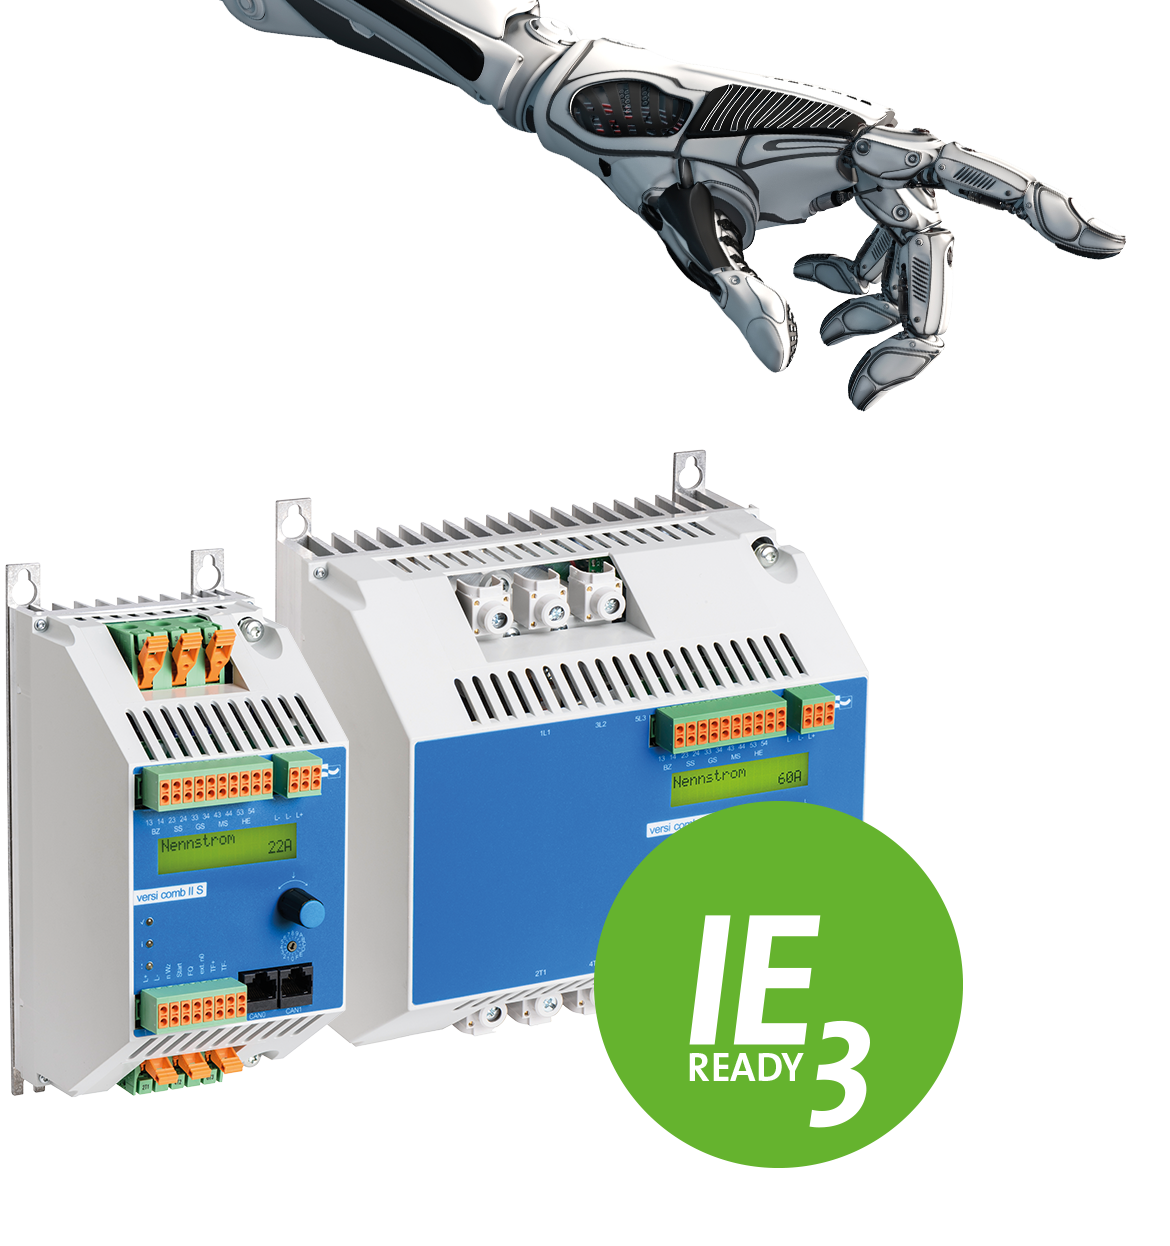  VersiComb II Safe combines a soft starter with an electronic direct-current braking device for woodworking machines and other applications